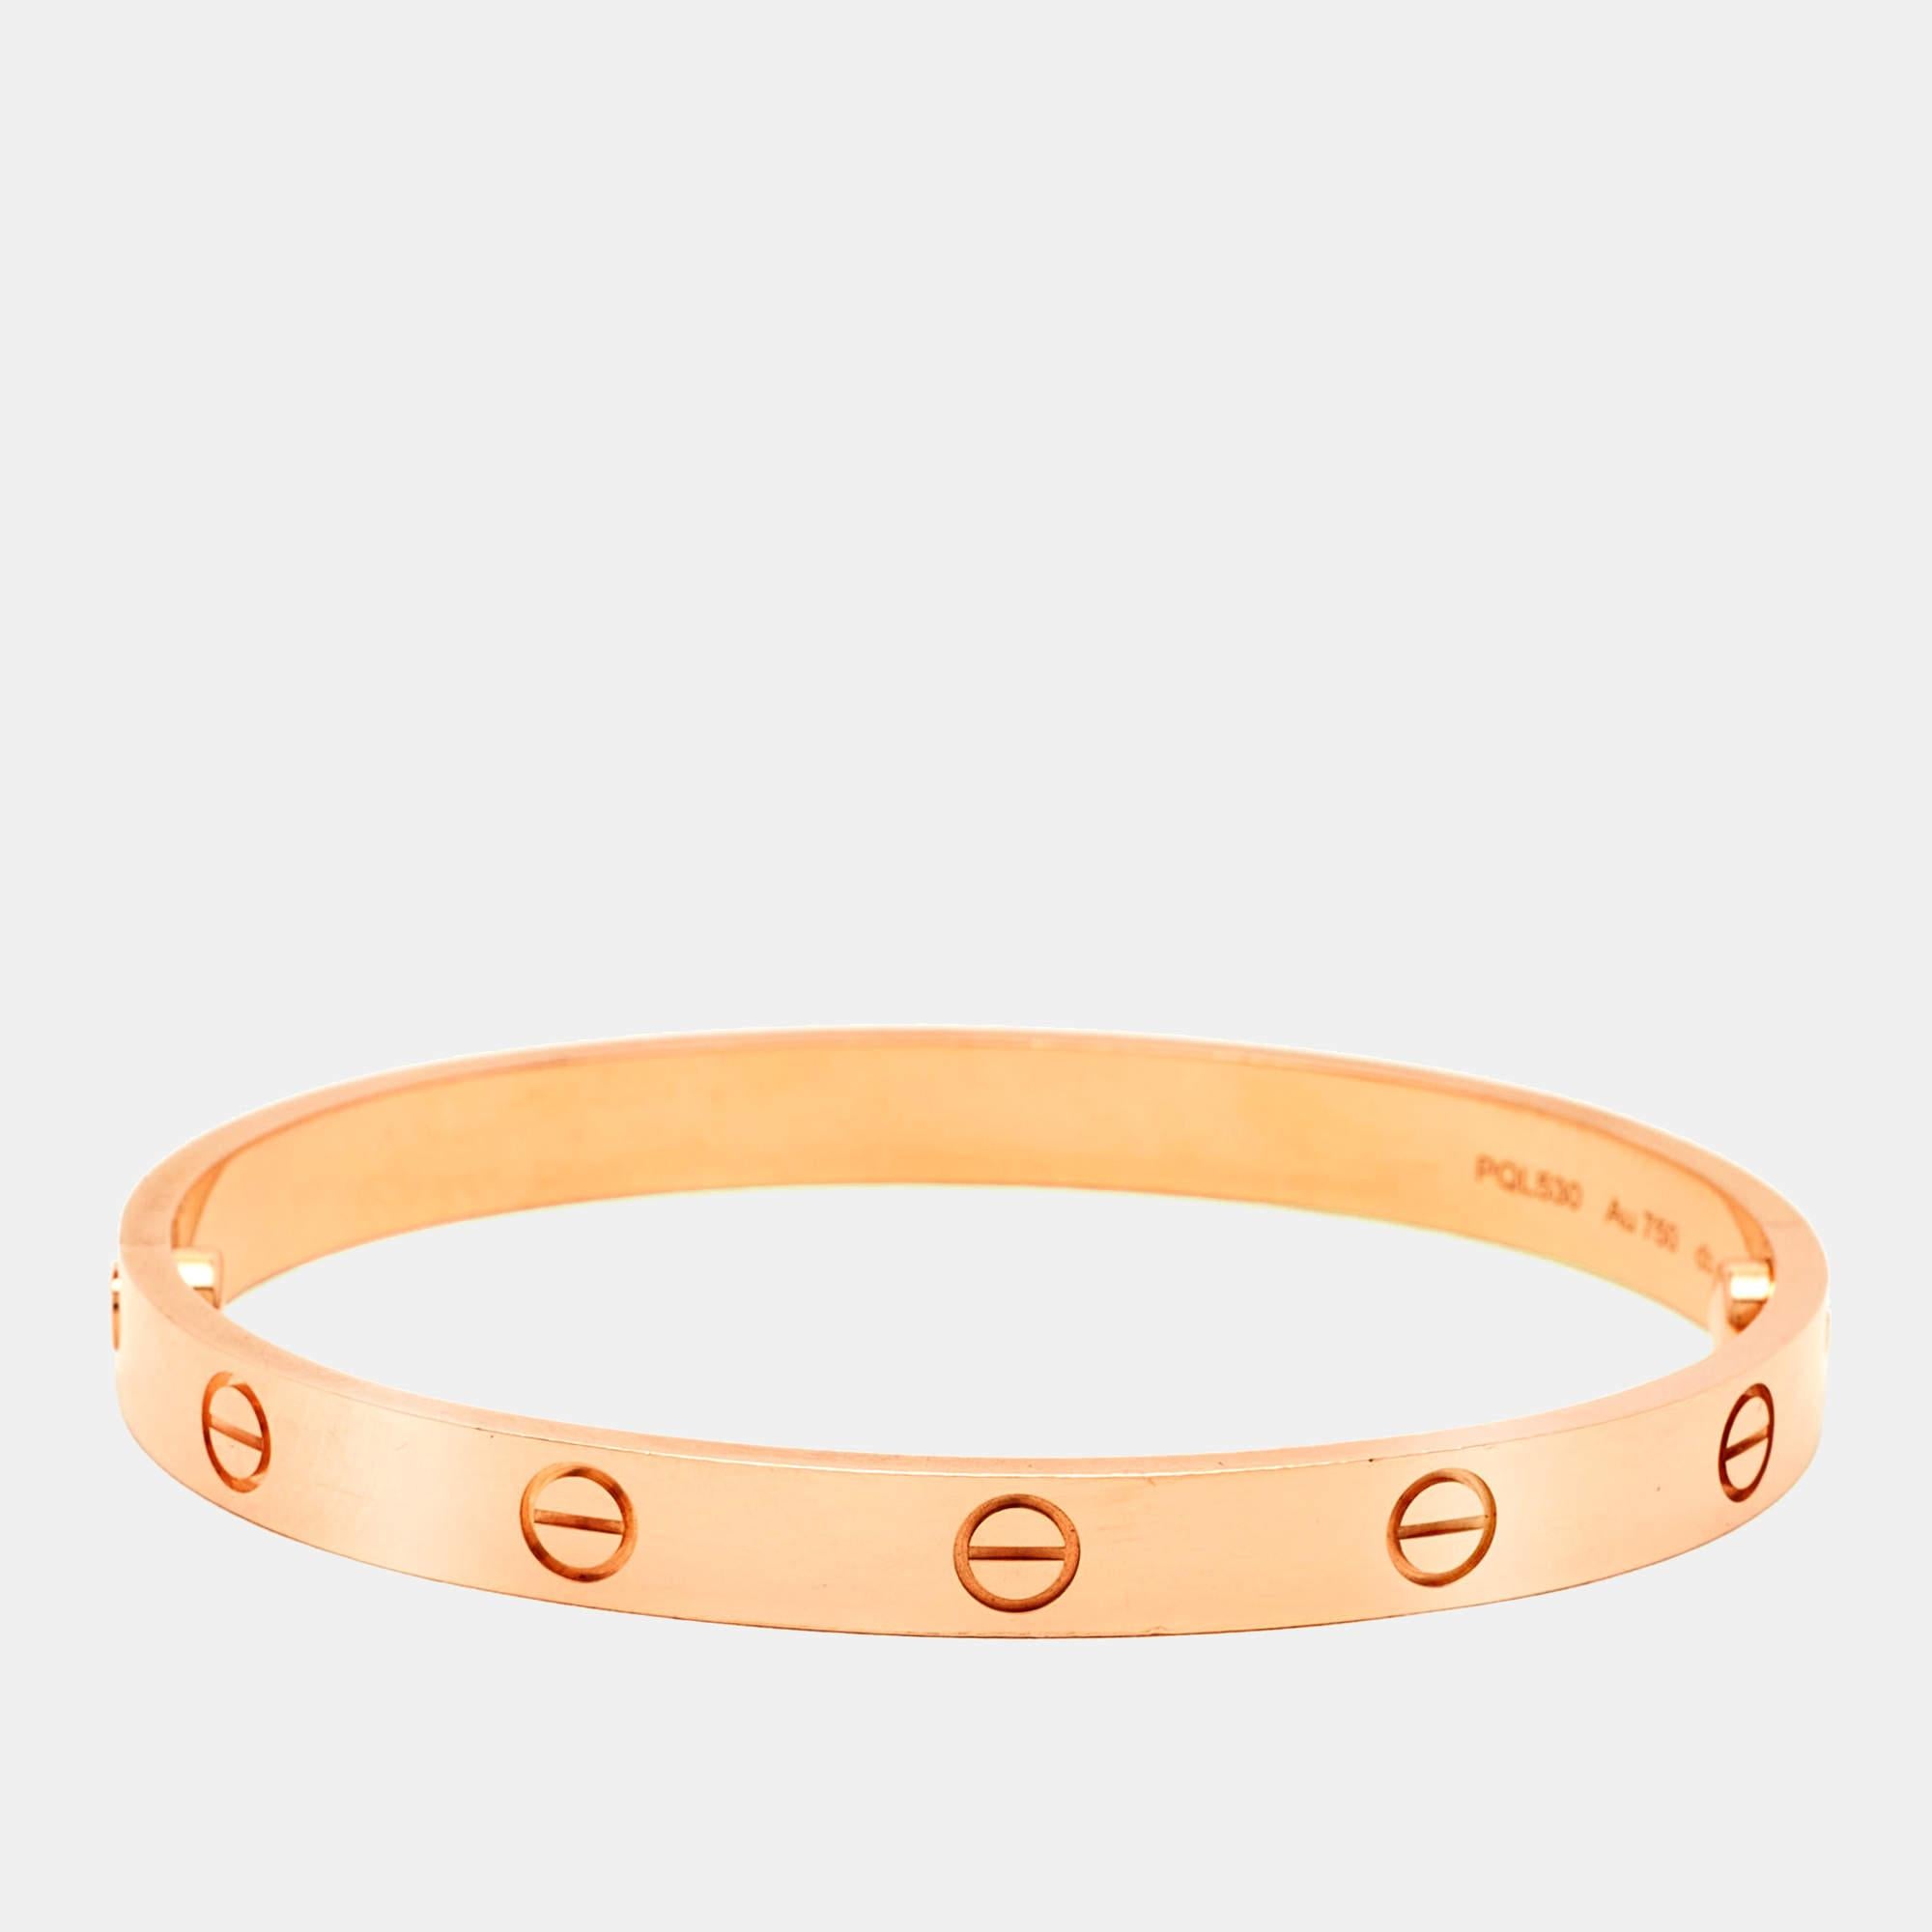 Cartier's Love bracelet is a modern symbol of luxury and a way to lock in one's love. Designed in an oval shape to comfortably sit around your wrist, the iconic love handcuff is laid with distinct screw motifs and secured by screw